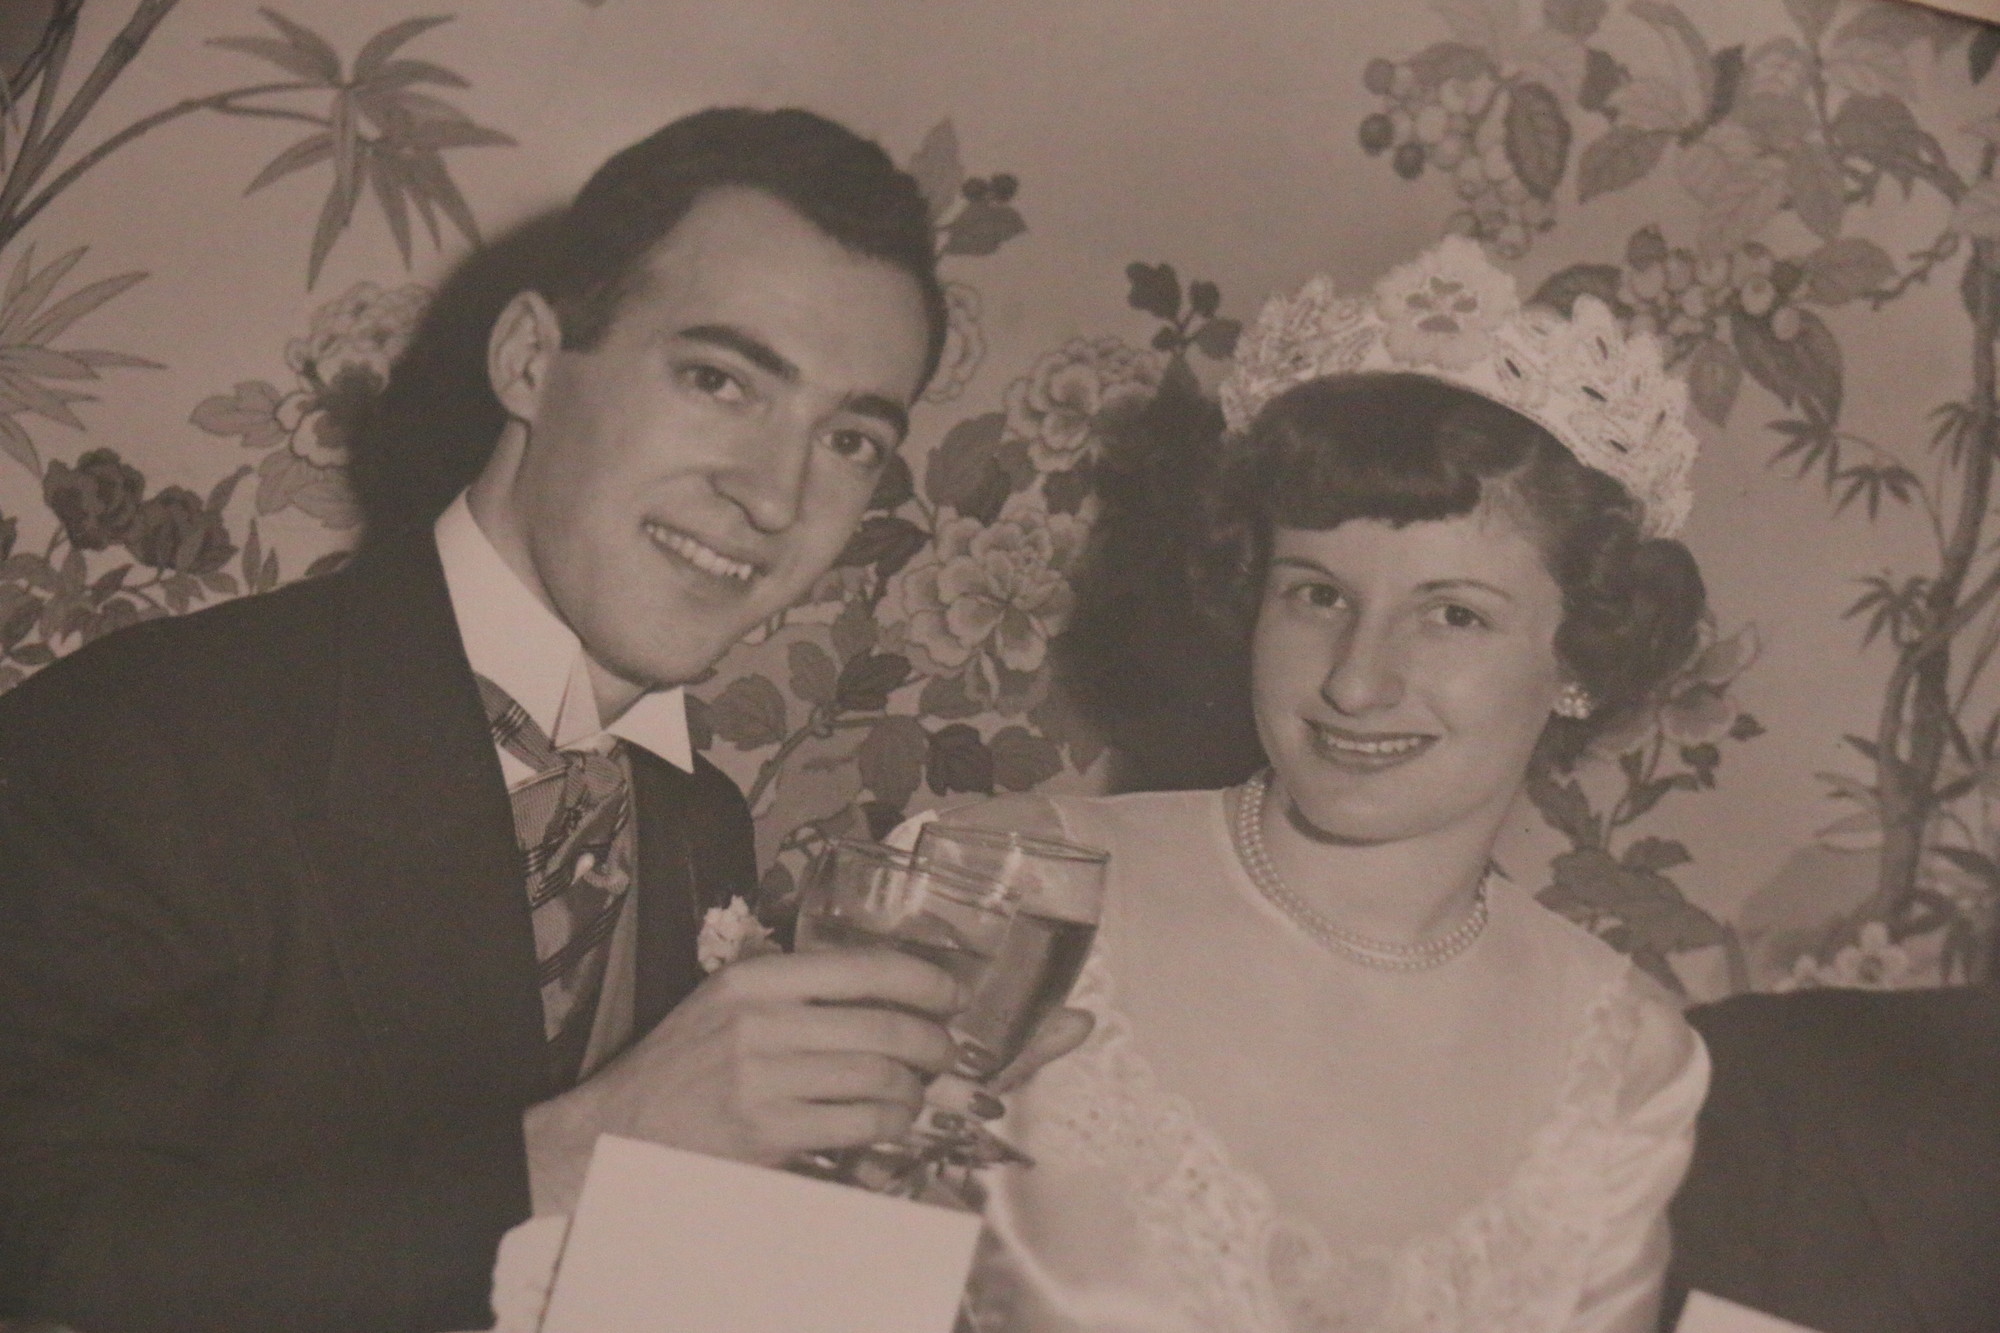 The Rosenthals were married in 1950.